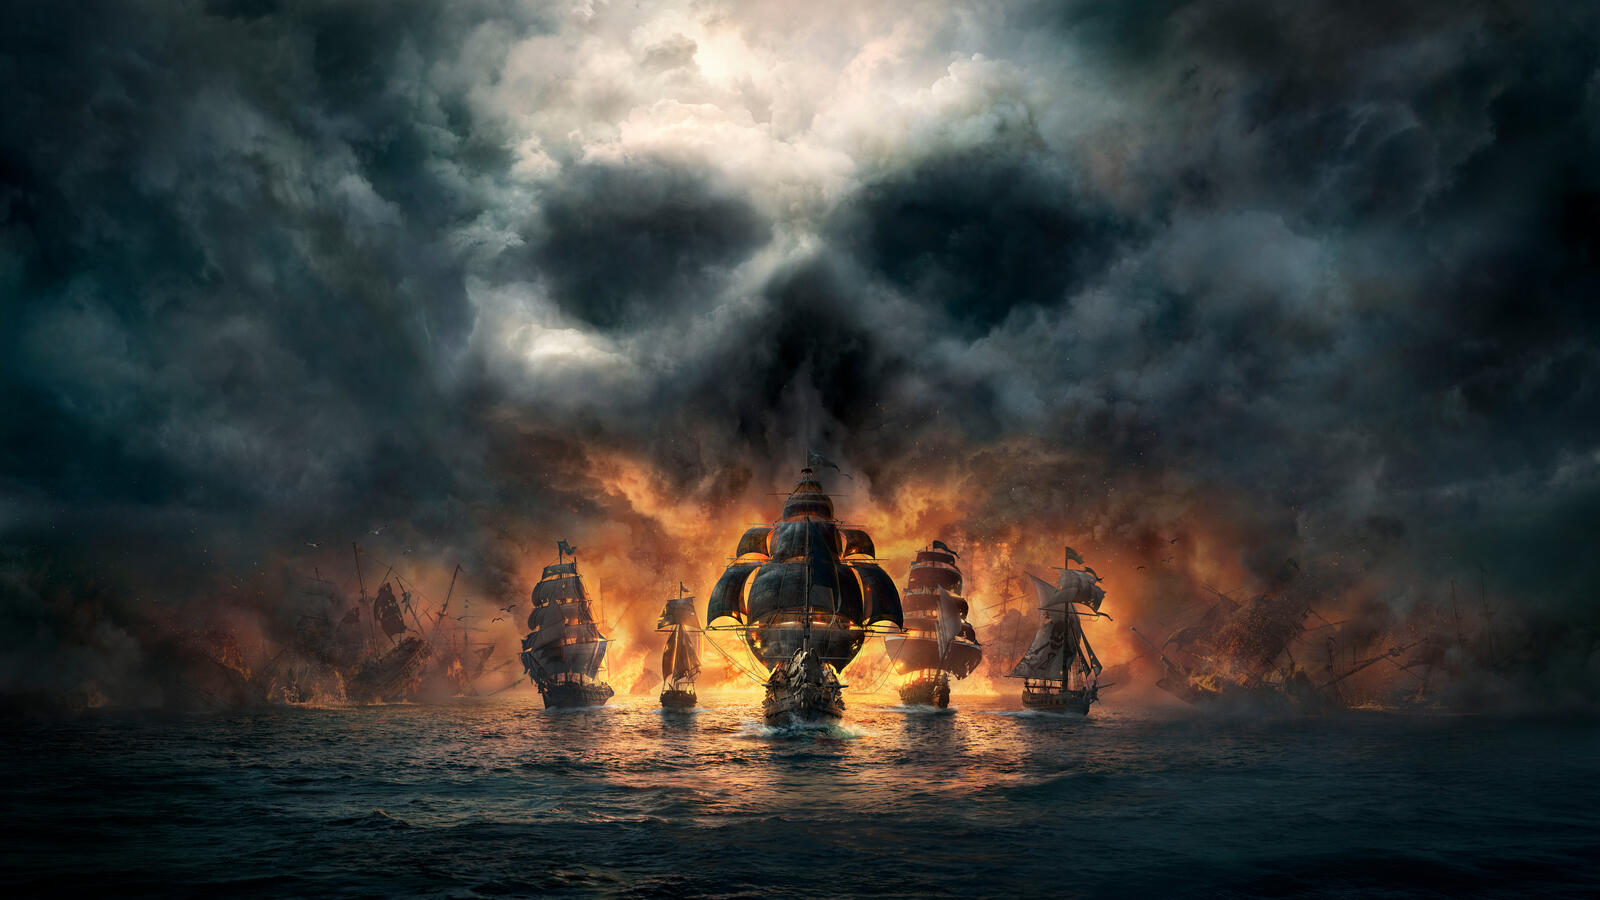 Free photo Pirate ships in the background of a large fire at sea